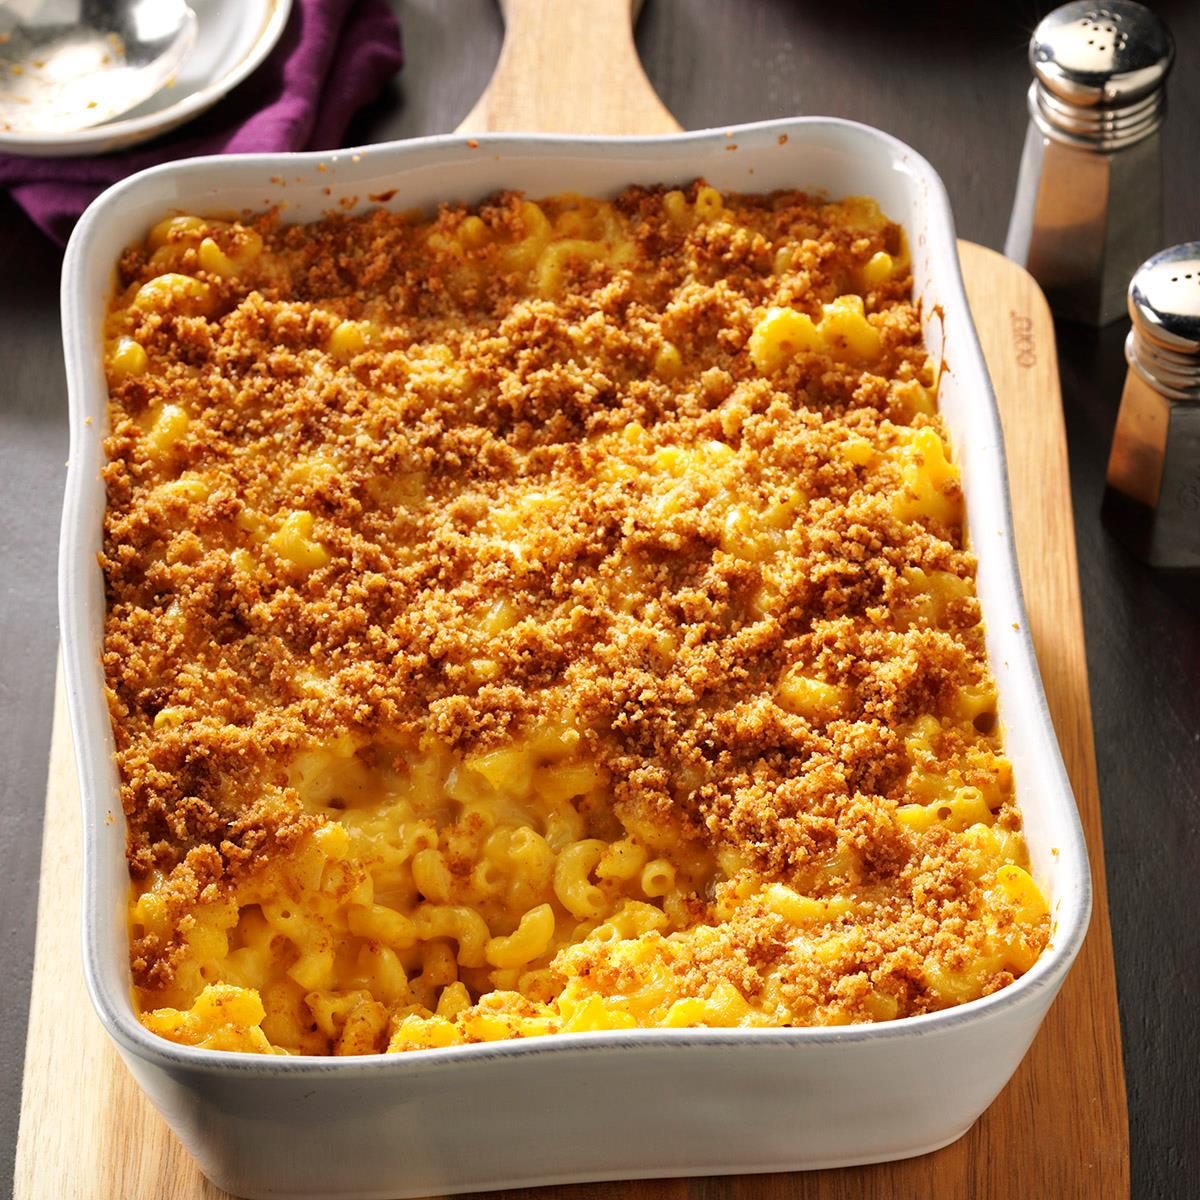 Day 27: Baked Mac and Cheese